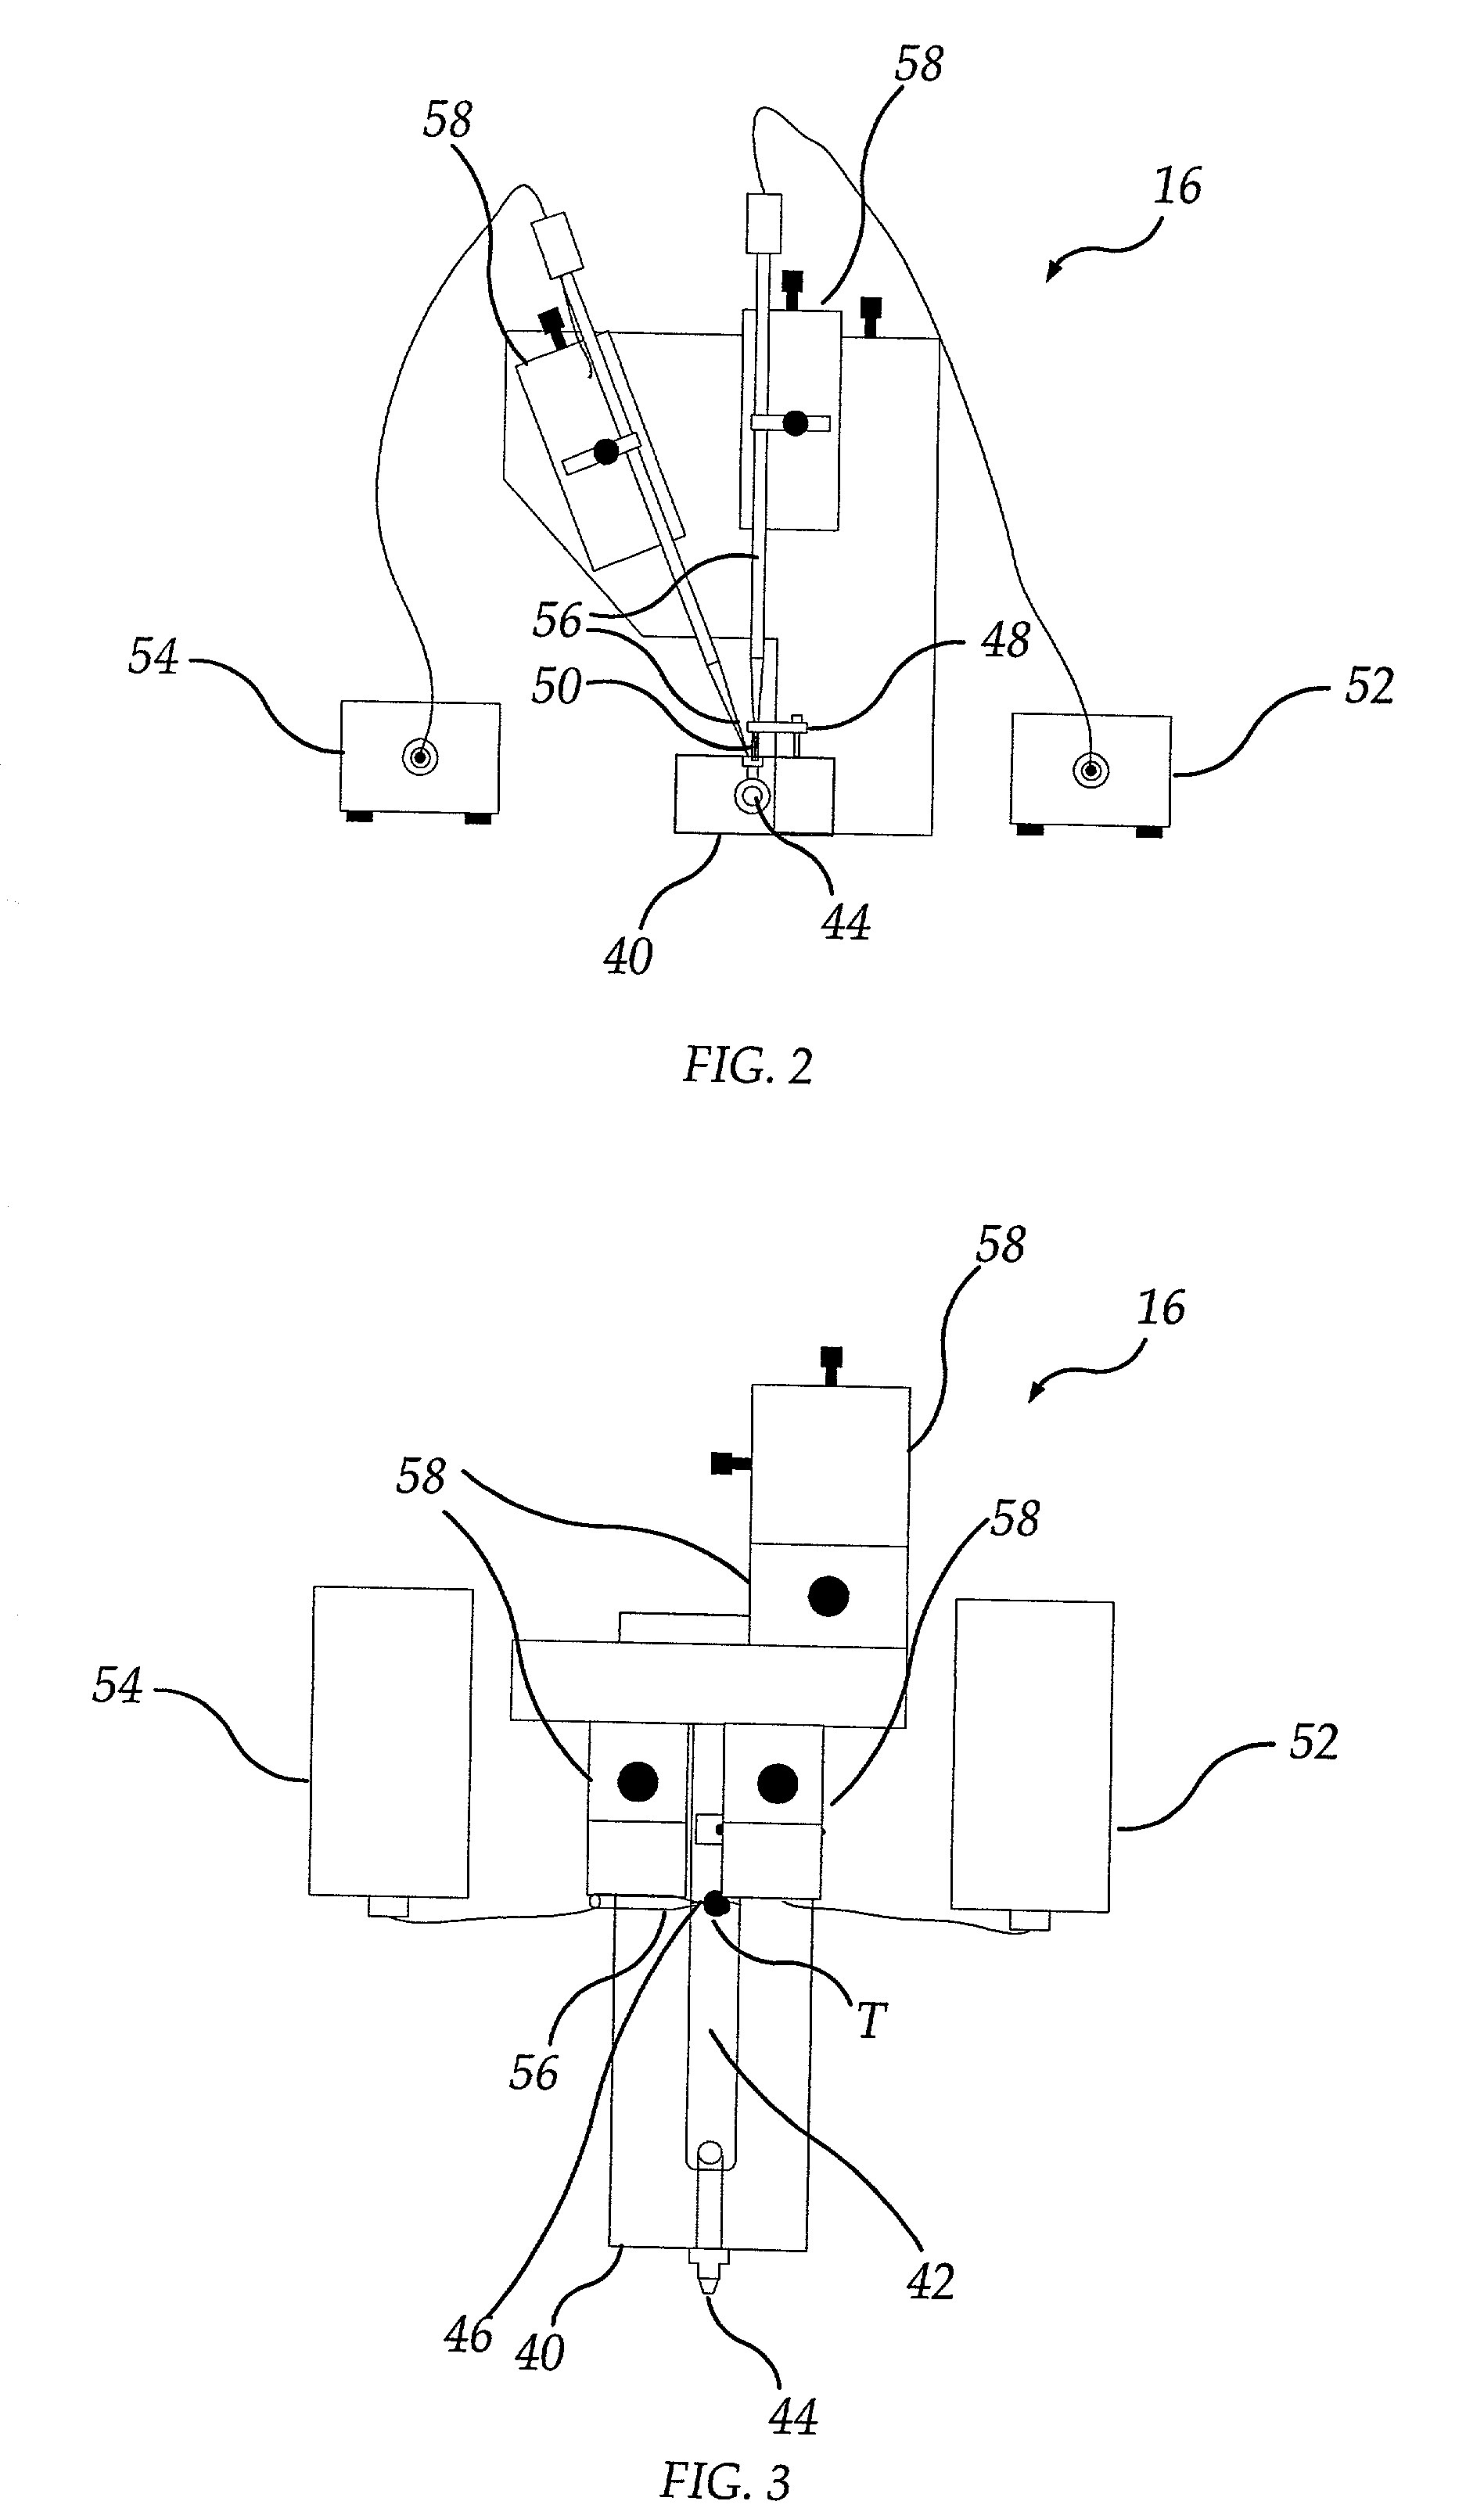 Apparatus and method for electrophysiological testing